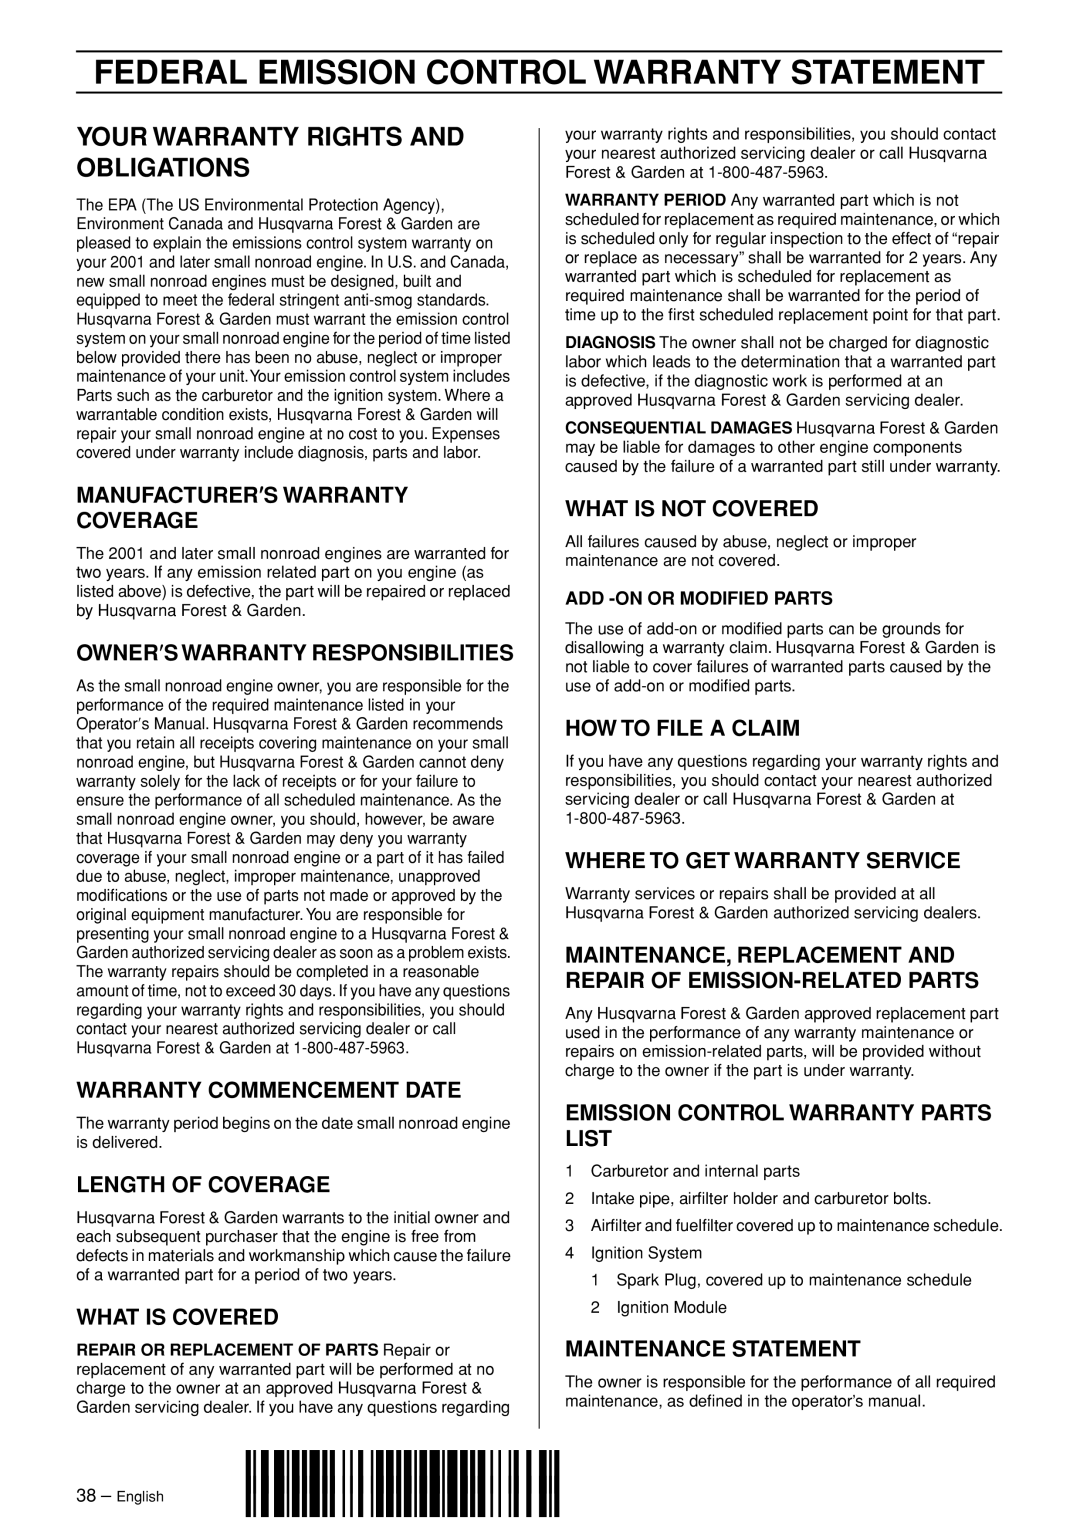 Husqvarna 336 EPA I Federal Emission Control Warranty Statement, Your Warranty Rights And Obligations, Length Of Coverage 